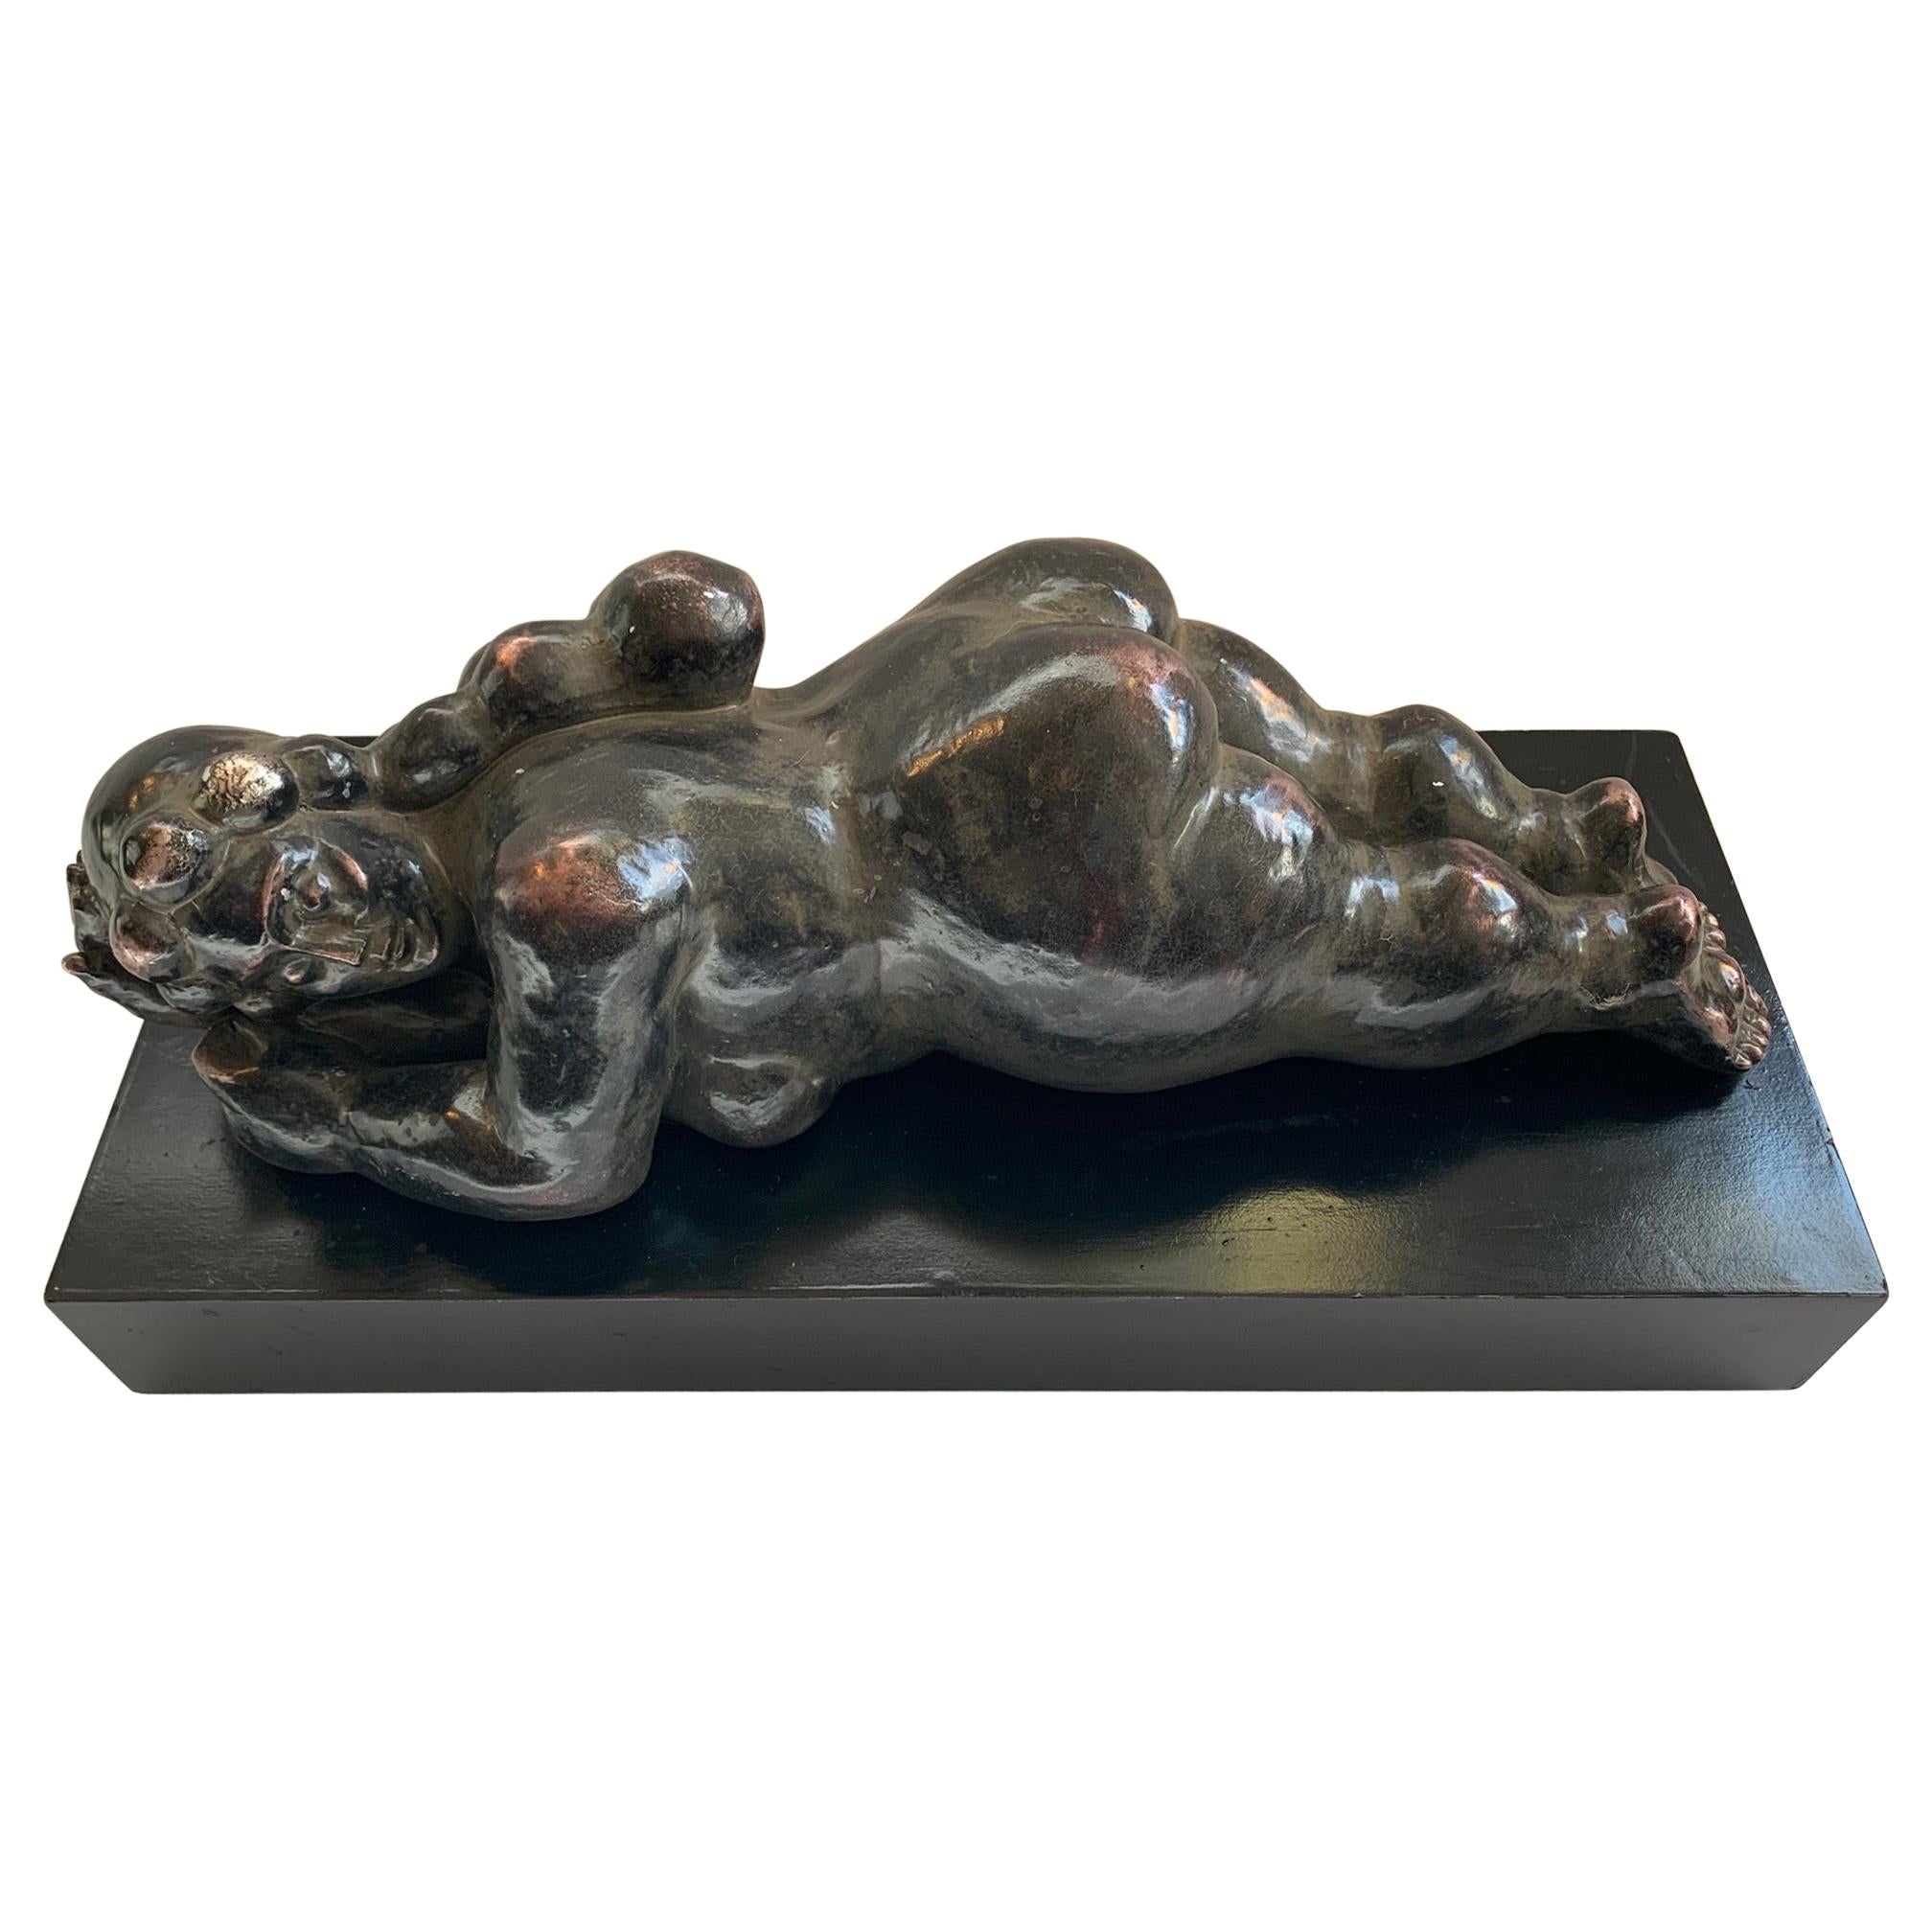 Sensual Reclining Nude Tabletop Sculpture in Style of Botero